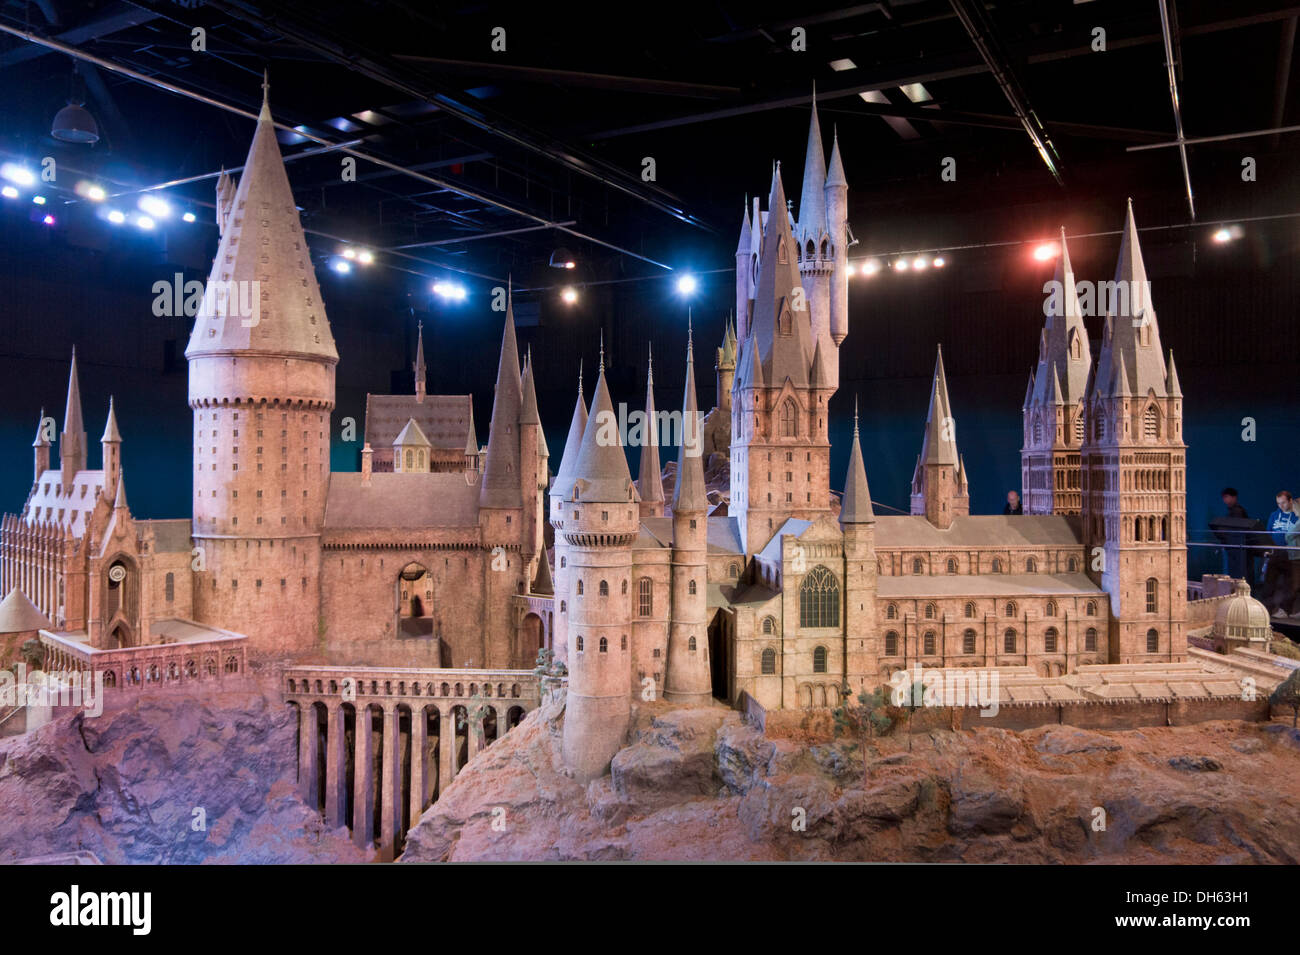 49,576 Harry Potter Photos & High Res Pictures - Getty Images